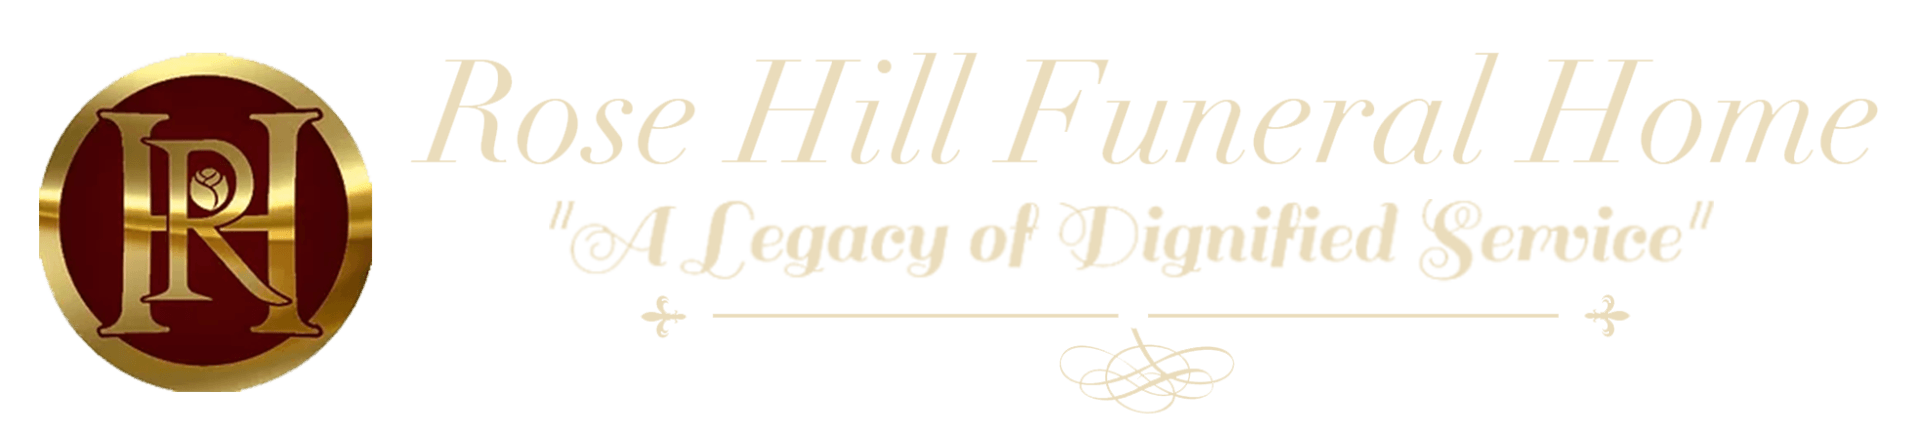 Rose Hill Funeral Home Logo